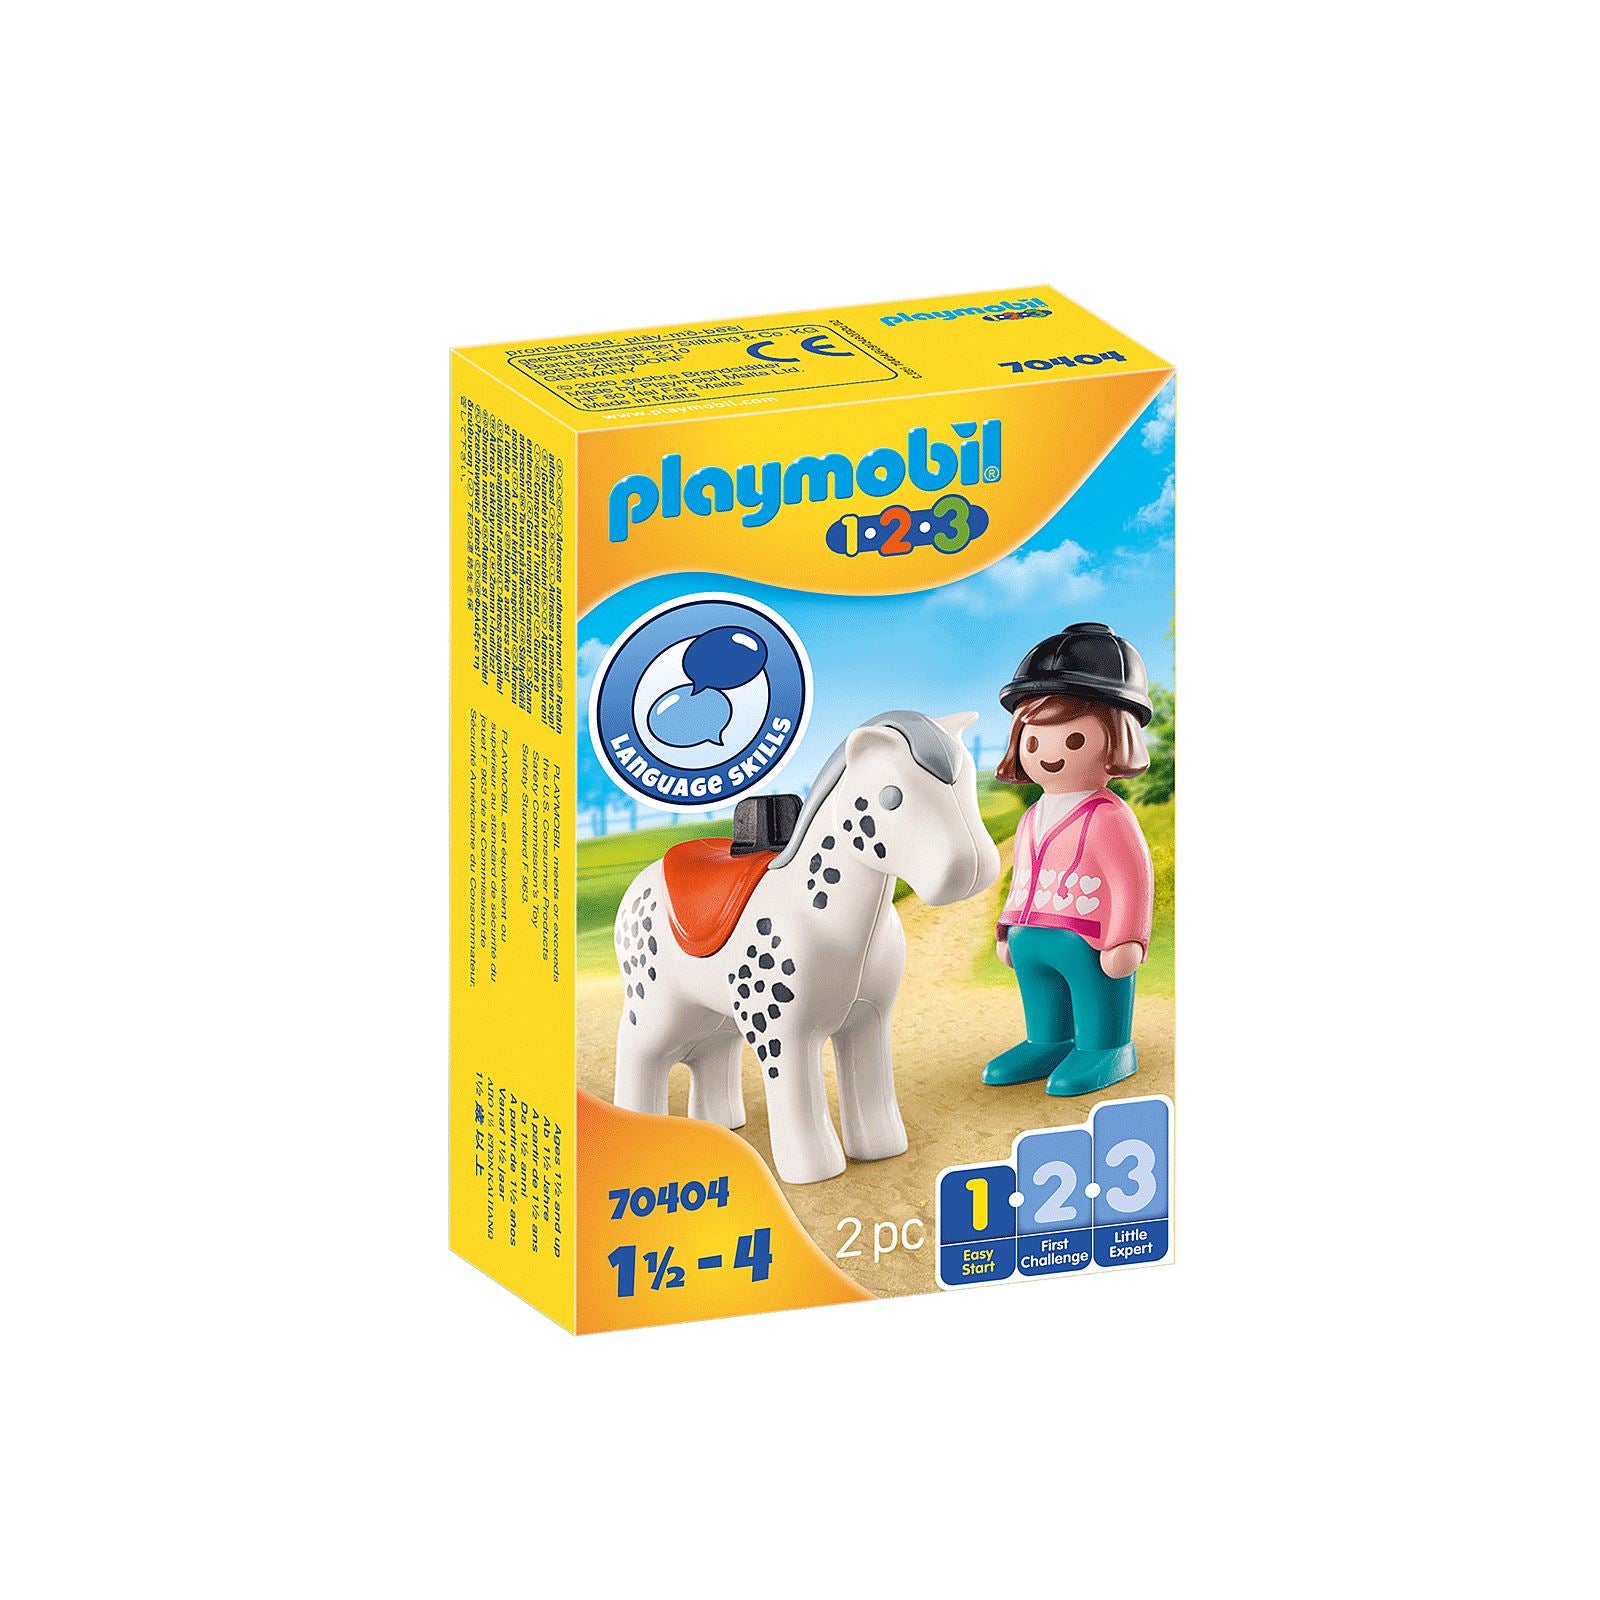 Playmobil 1.2.3. Rider with Horse